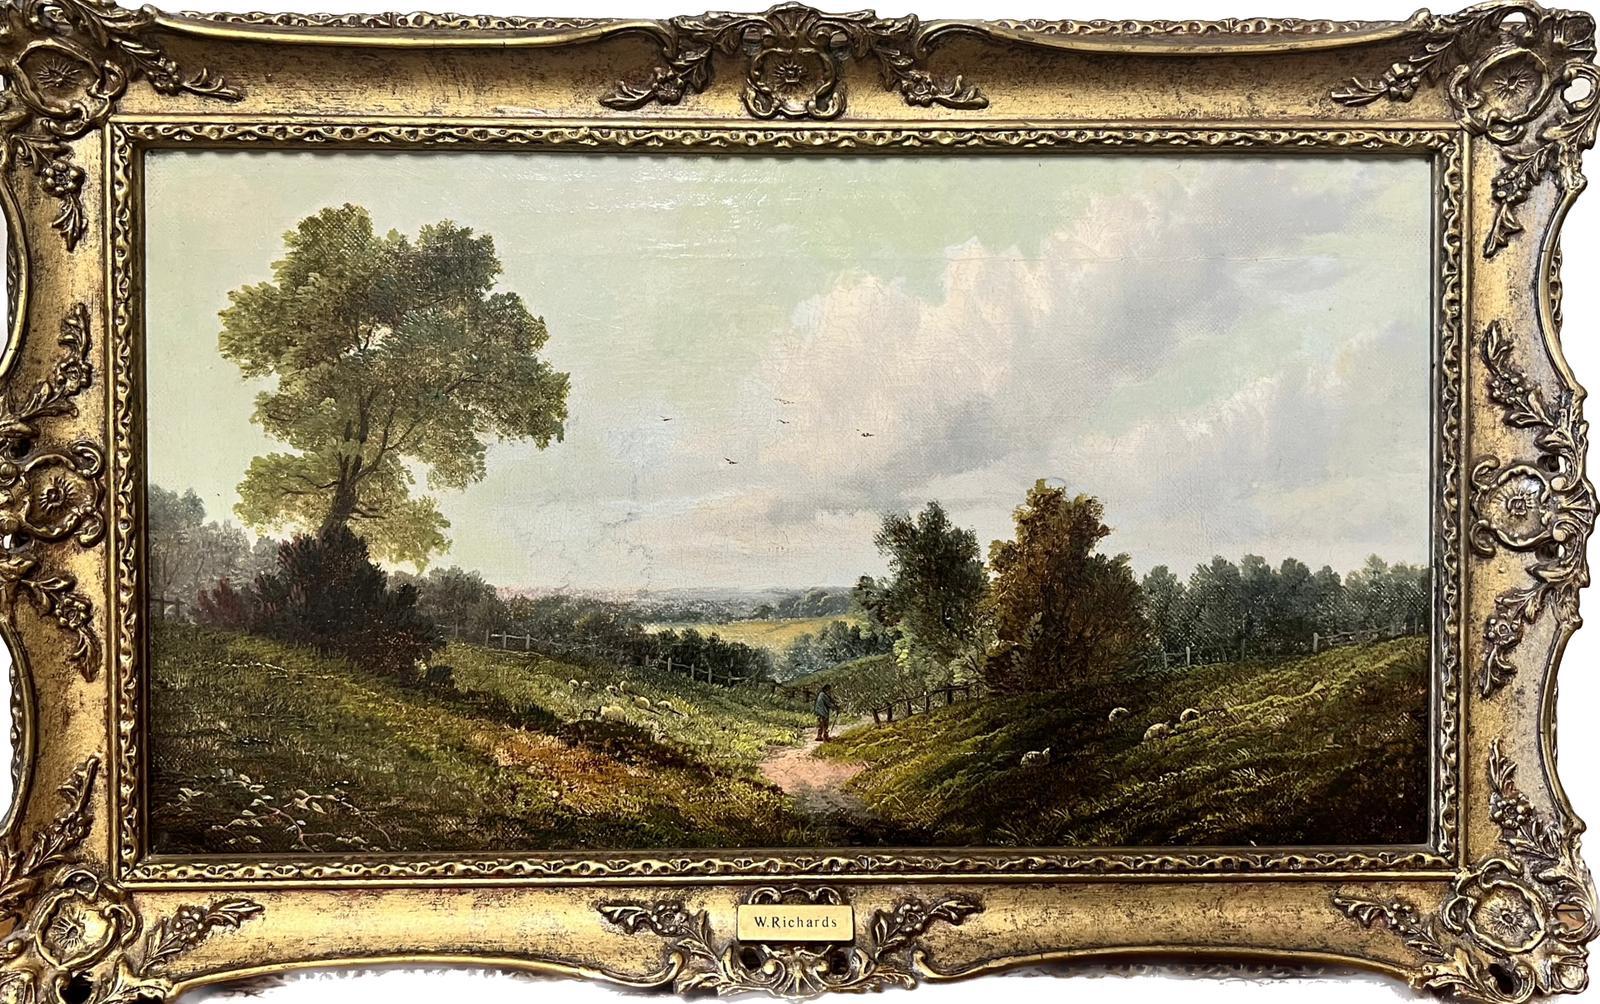 Artist/ School: British School, late 19th century, with name plaque to frame

Title: The Tranquil Landscape

Medium: Oil on canvas, framed

framed: 13 x 21 inches
canvas : 10 x 18 inches

Provenance: from a collection in England. 

Condition: The